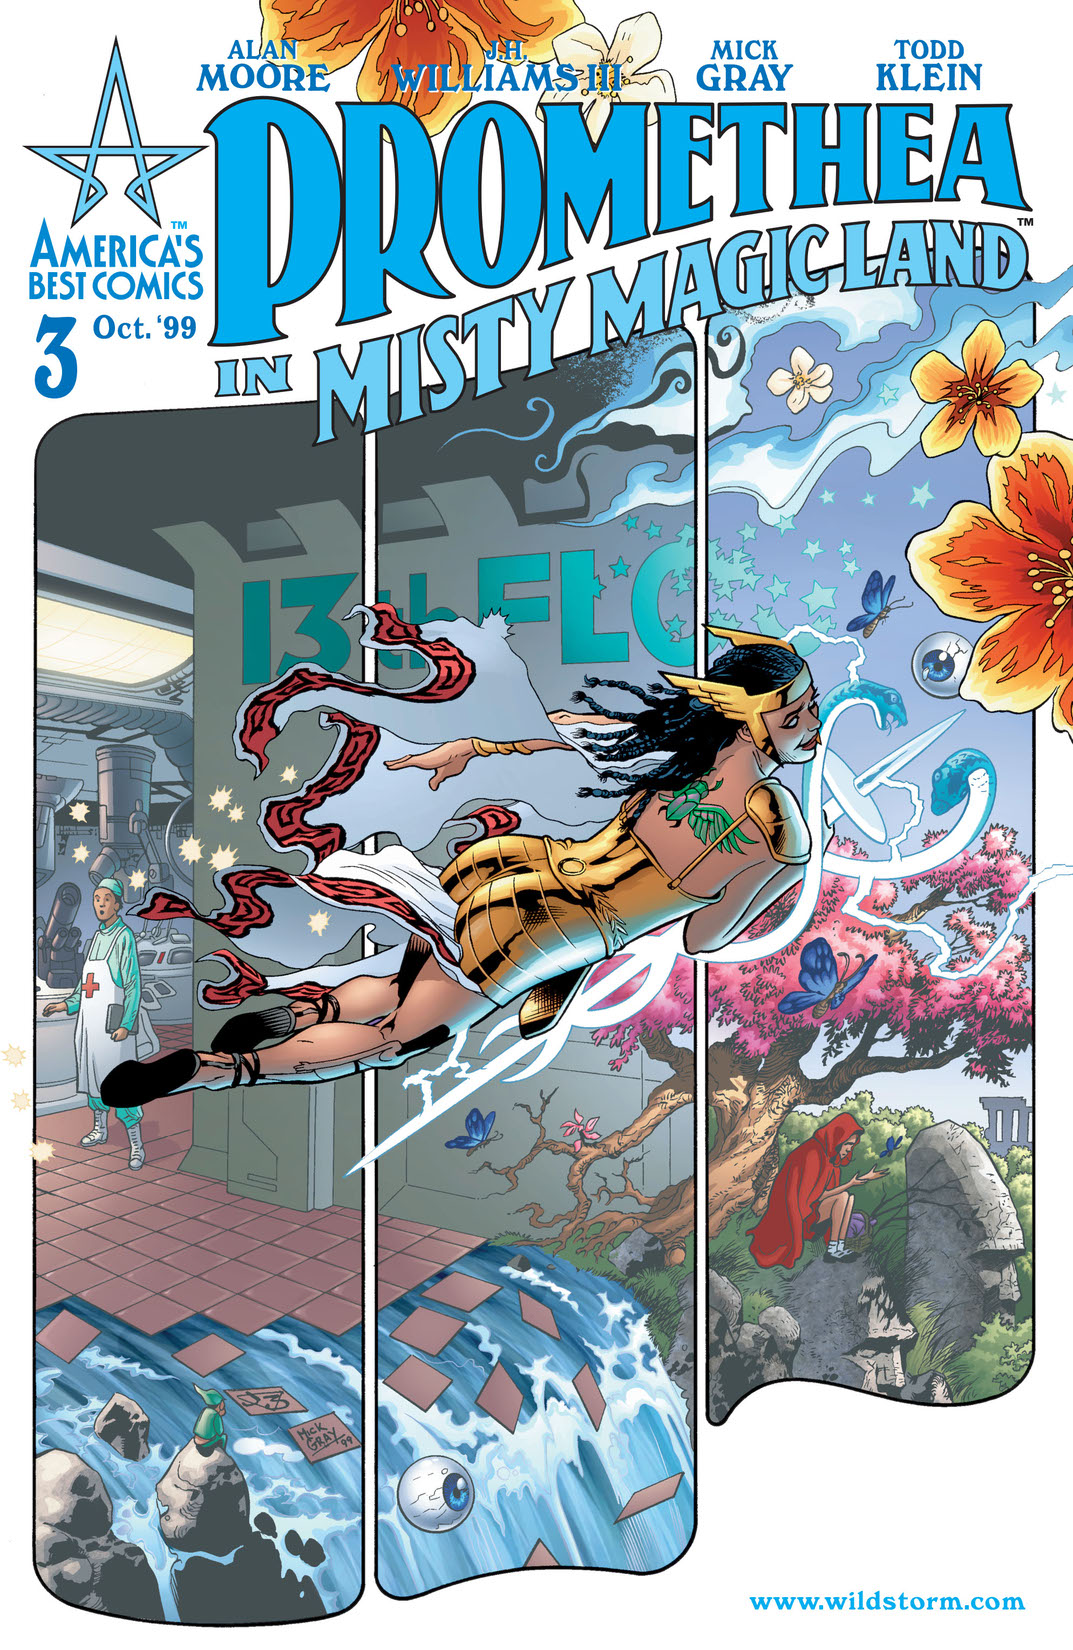 Promethea #3 preview images